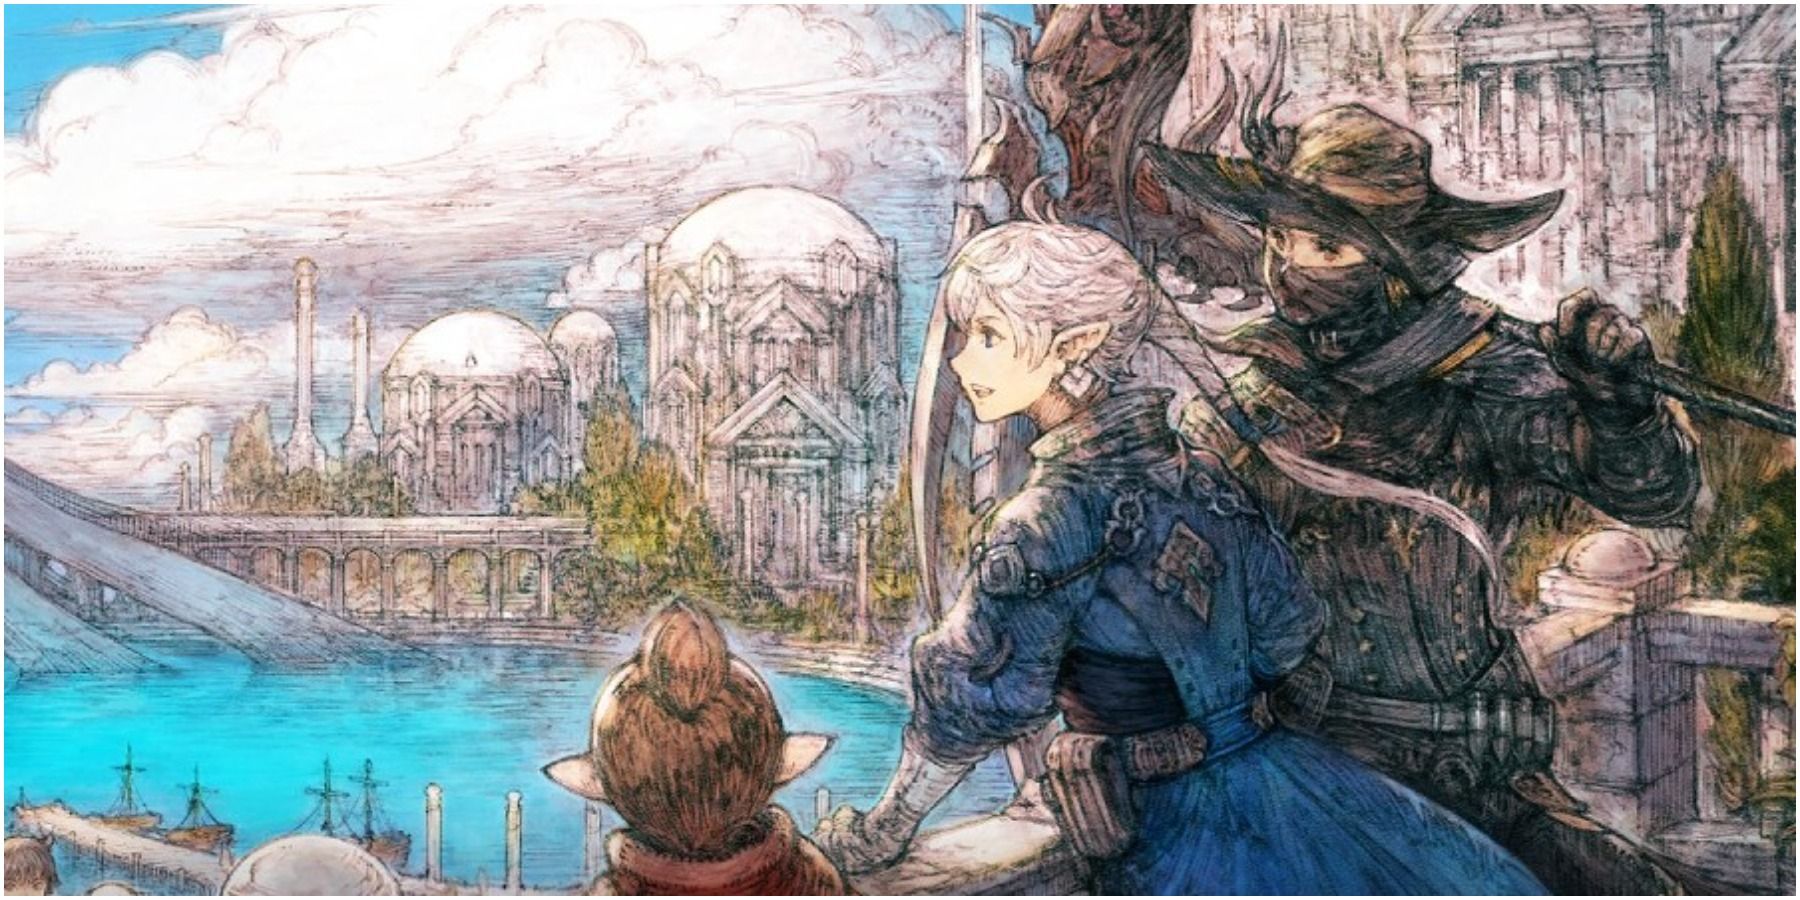 Endwalkers Delay Proves How Wholesome The Final Fantasy 14 Community Is